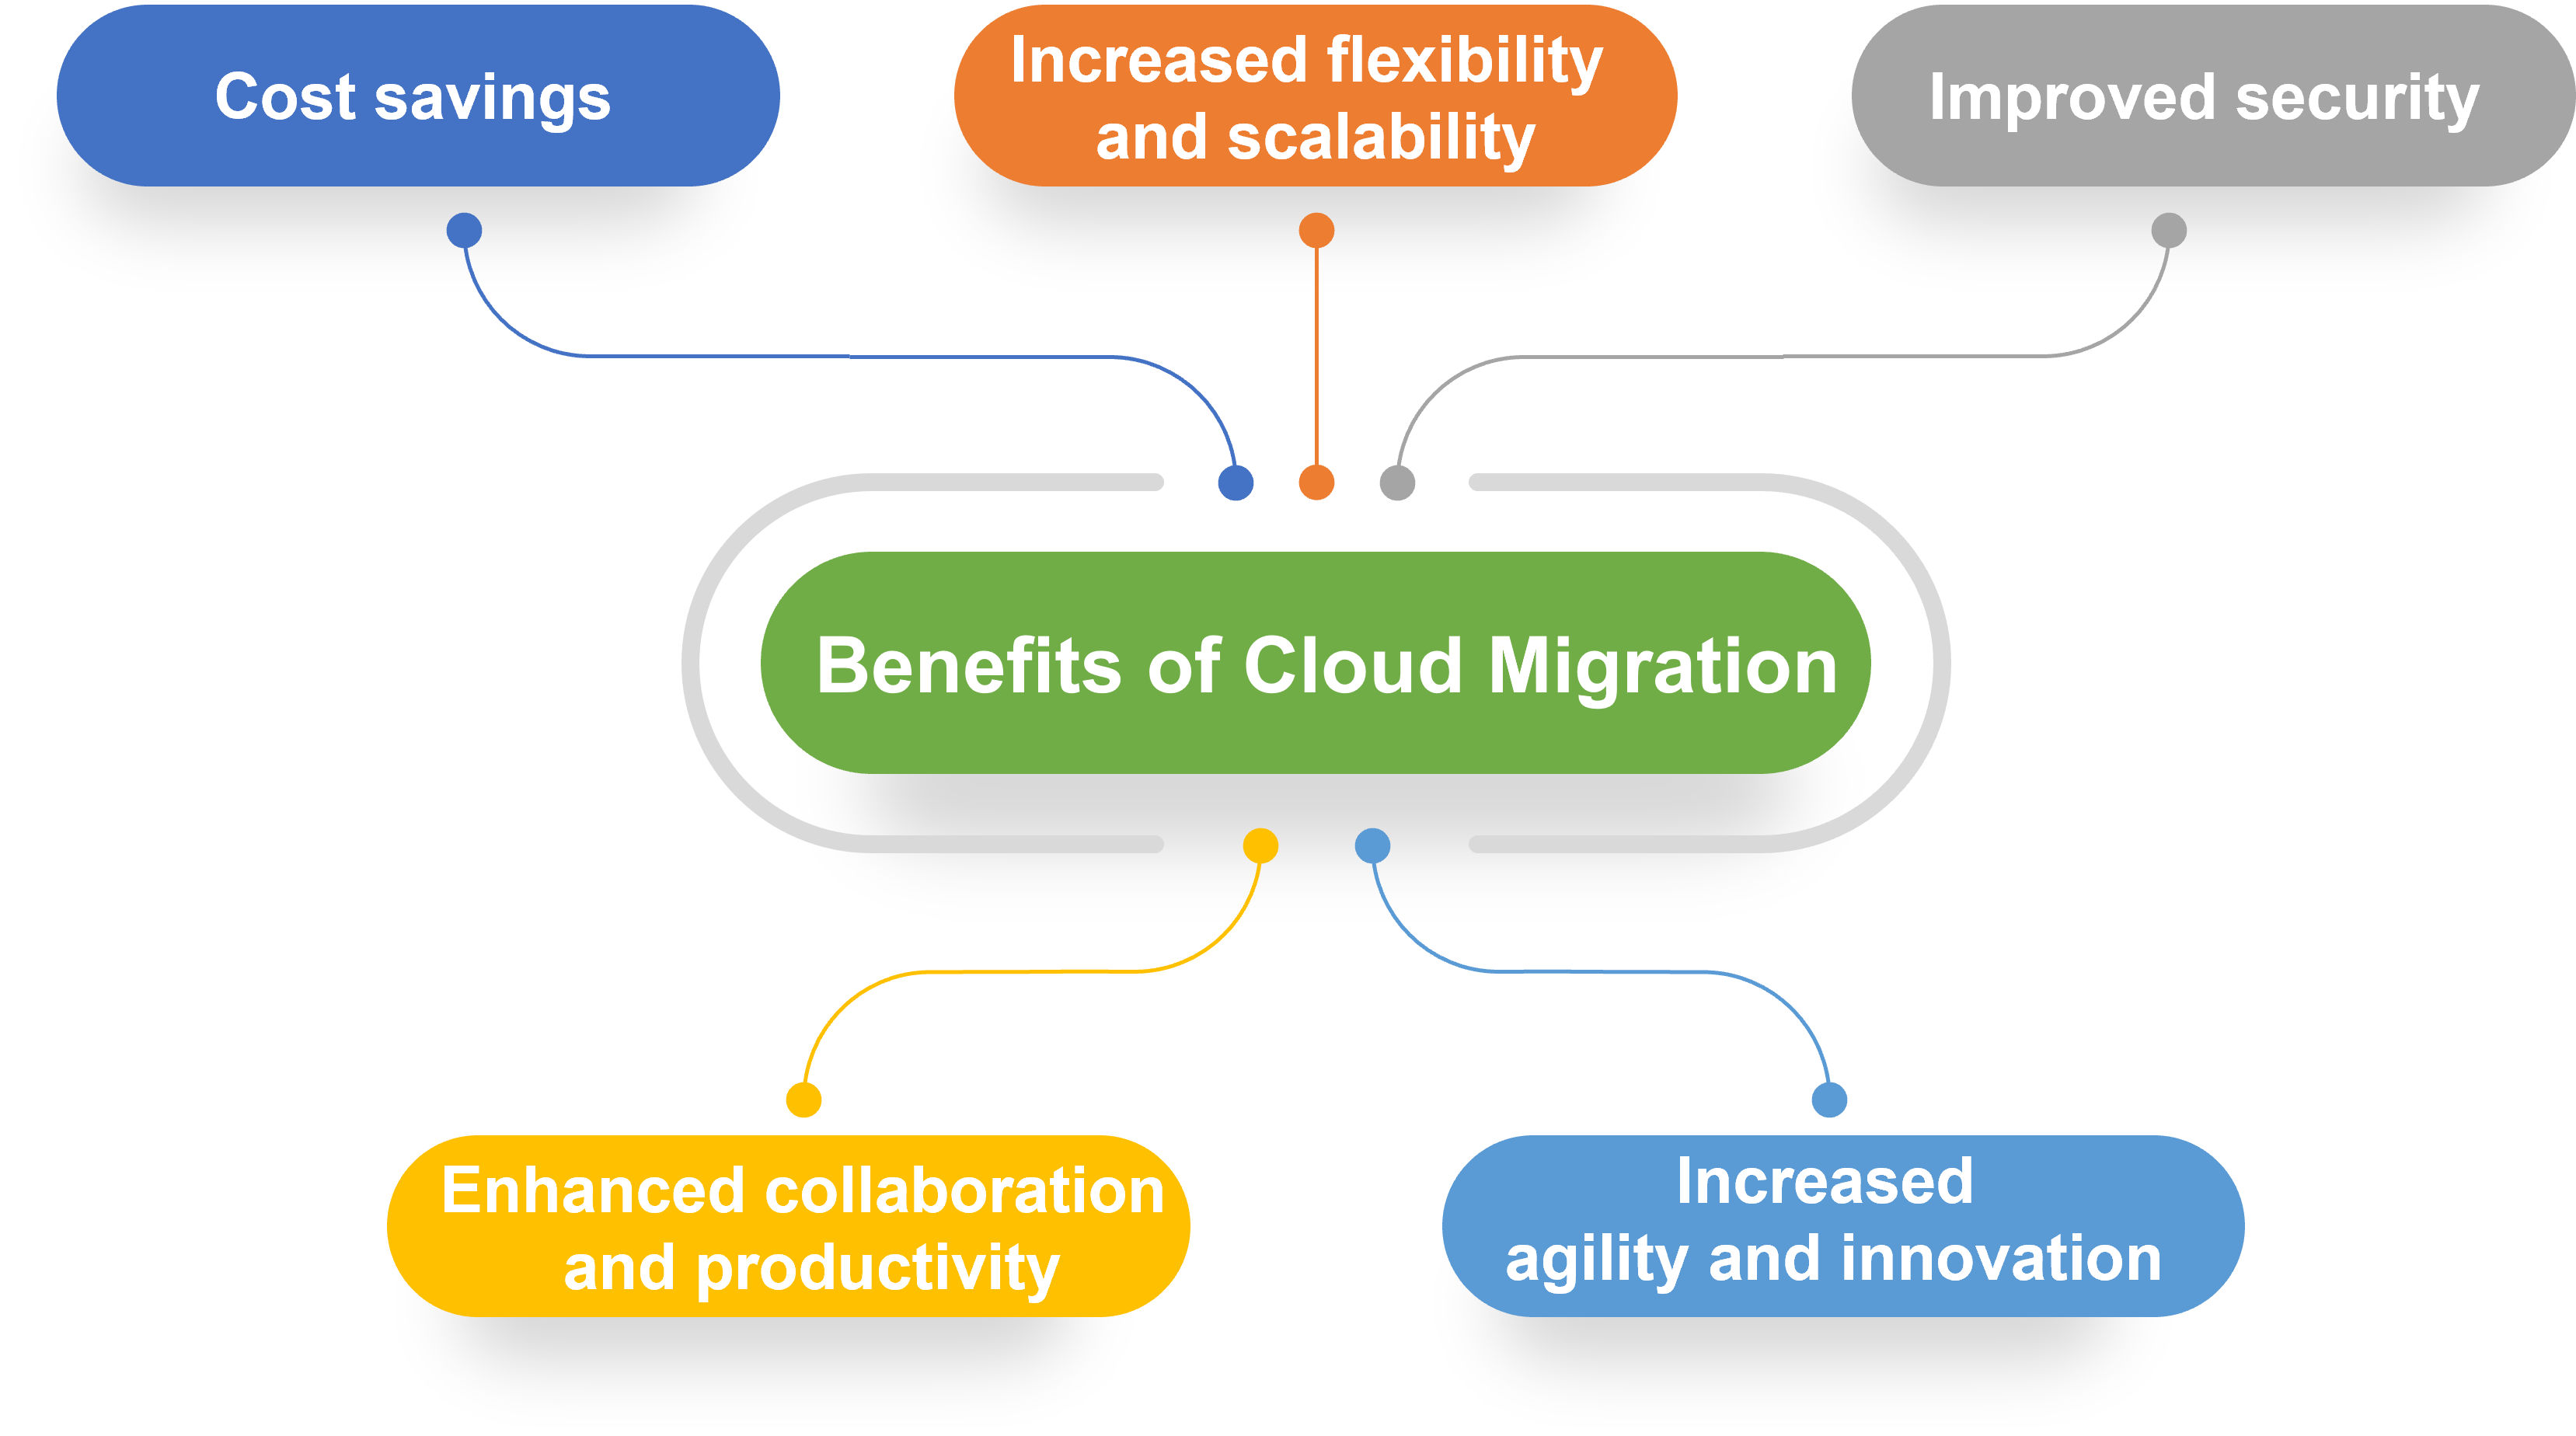 What Are Some Benefits of Cloud Migration?